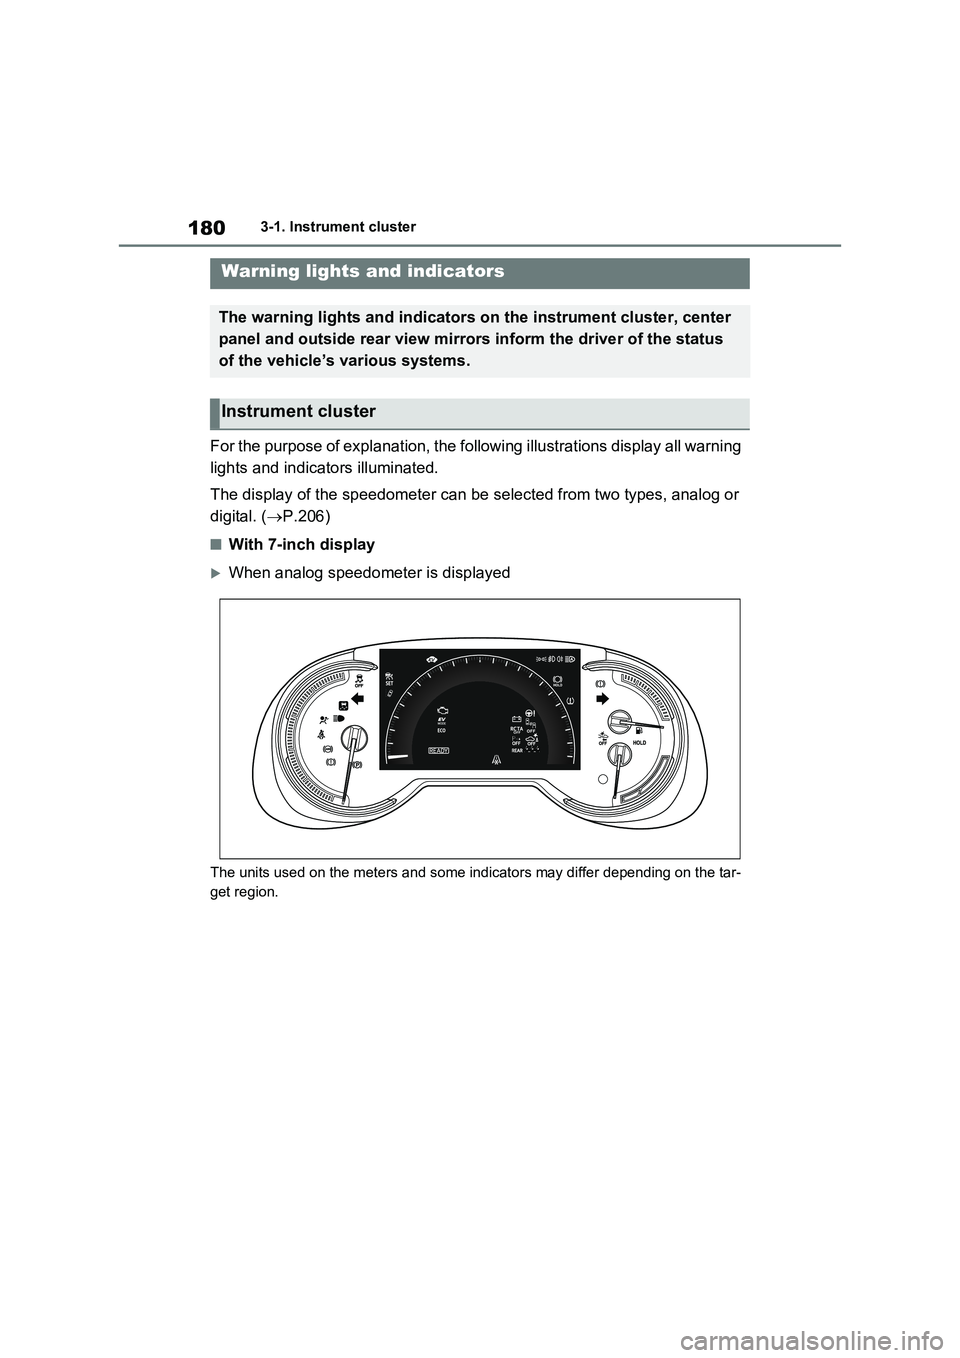 TOYOTA RAV4 PLUG-IN HYBRID 2023  Owners Manual 1803-1. Instrument cluster
3-1.In strument clu ste r
For the purpose of explanation, the following illustrations display all warning  
lights and indicators illuminated. 
The display of the speedomete